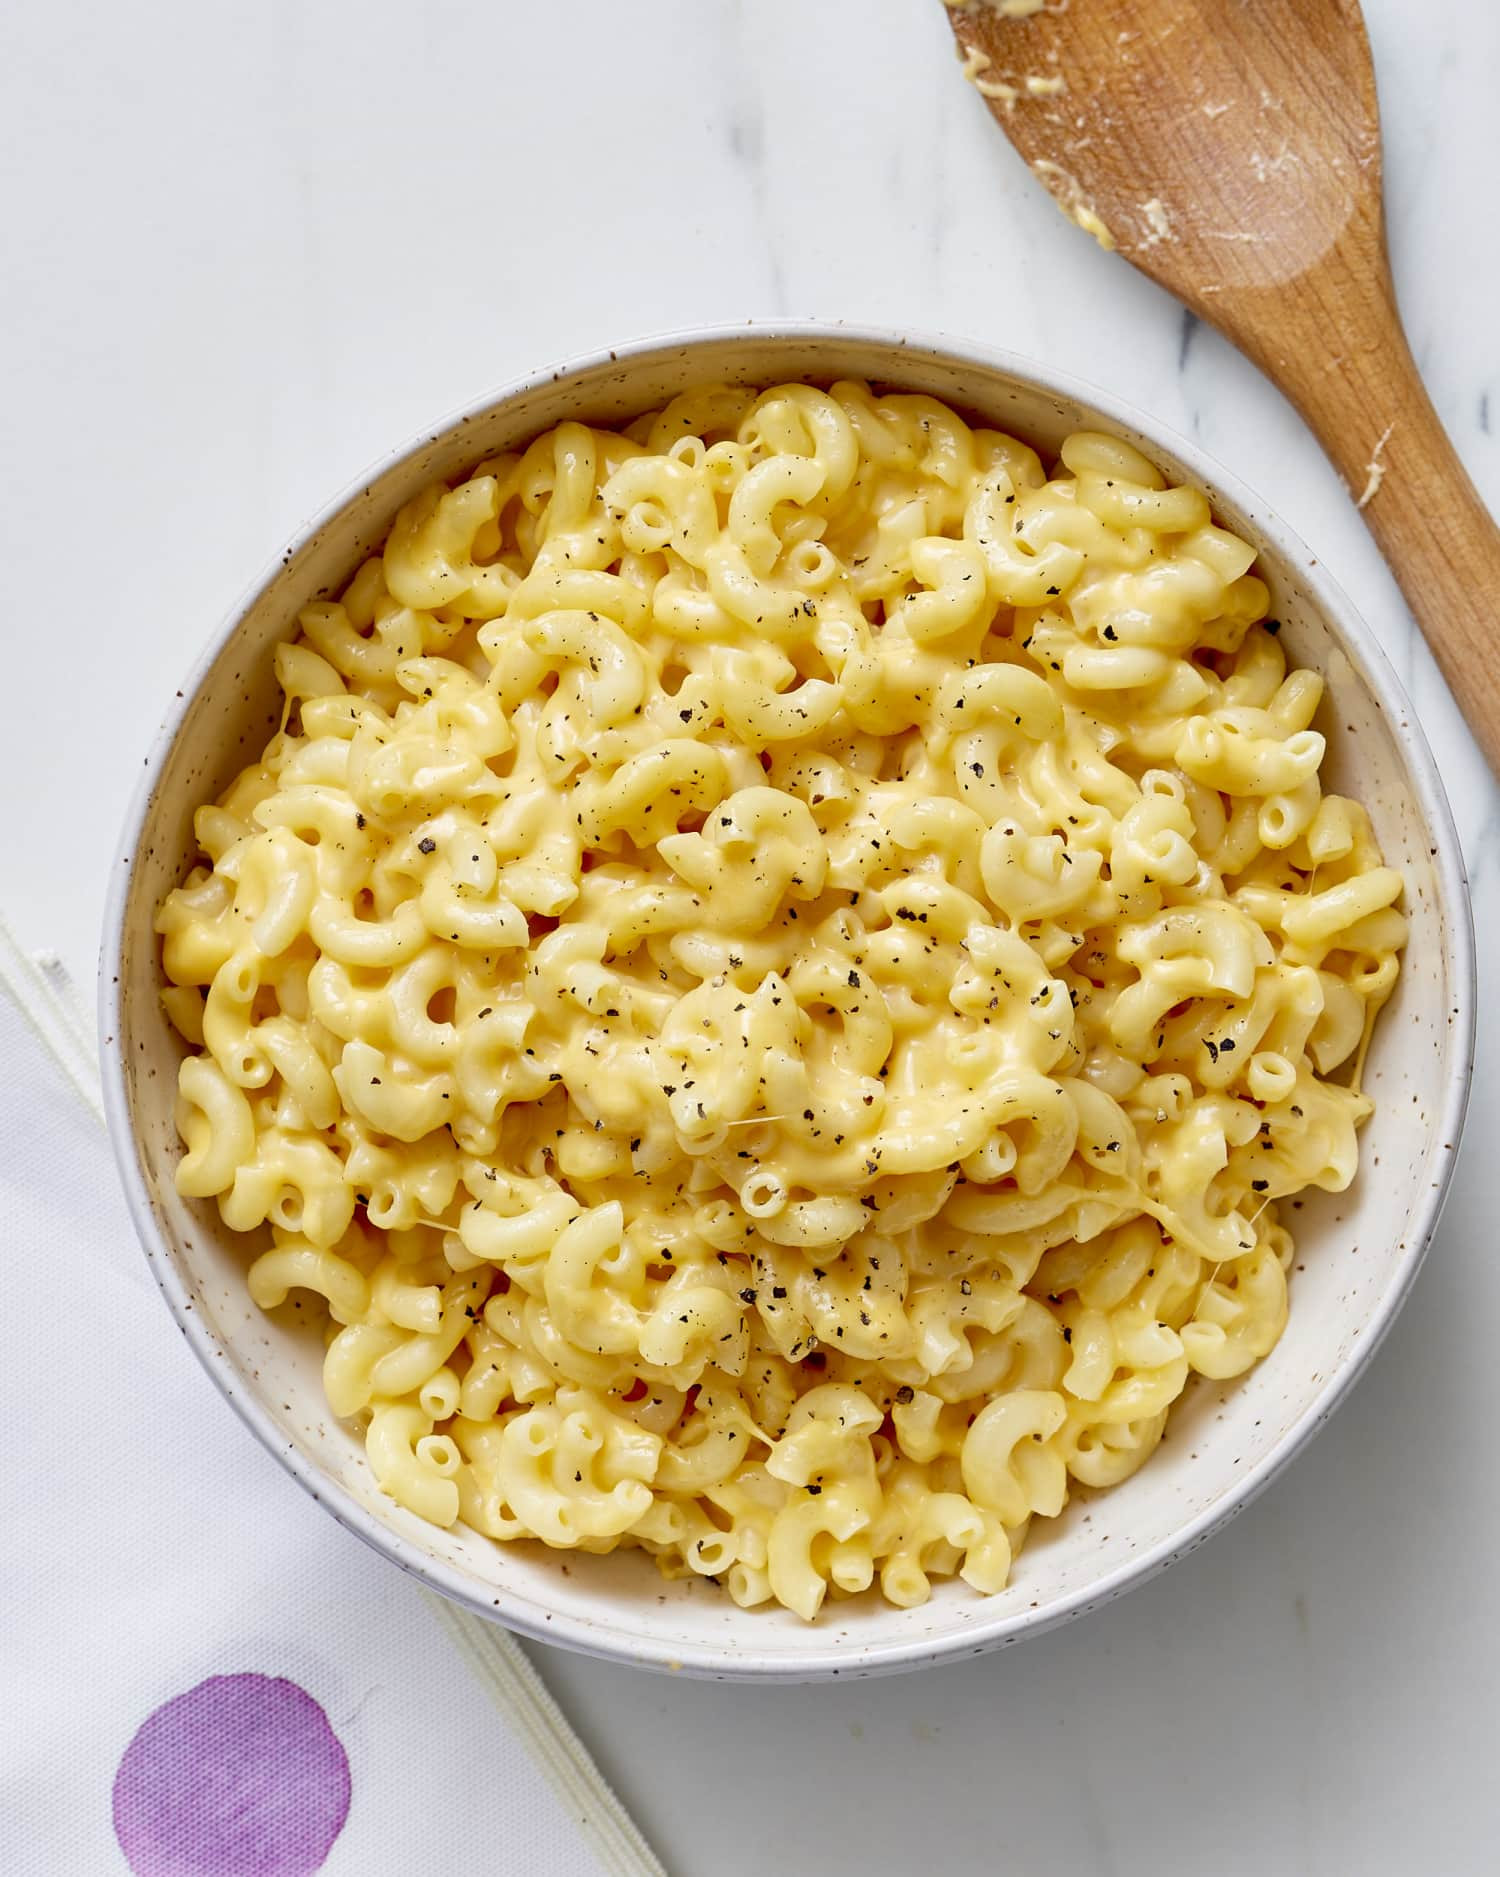 Stovetop Macaroni And Cheese Recipe
 How To Make the Best Macaroni and Cheese on the Stove